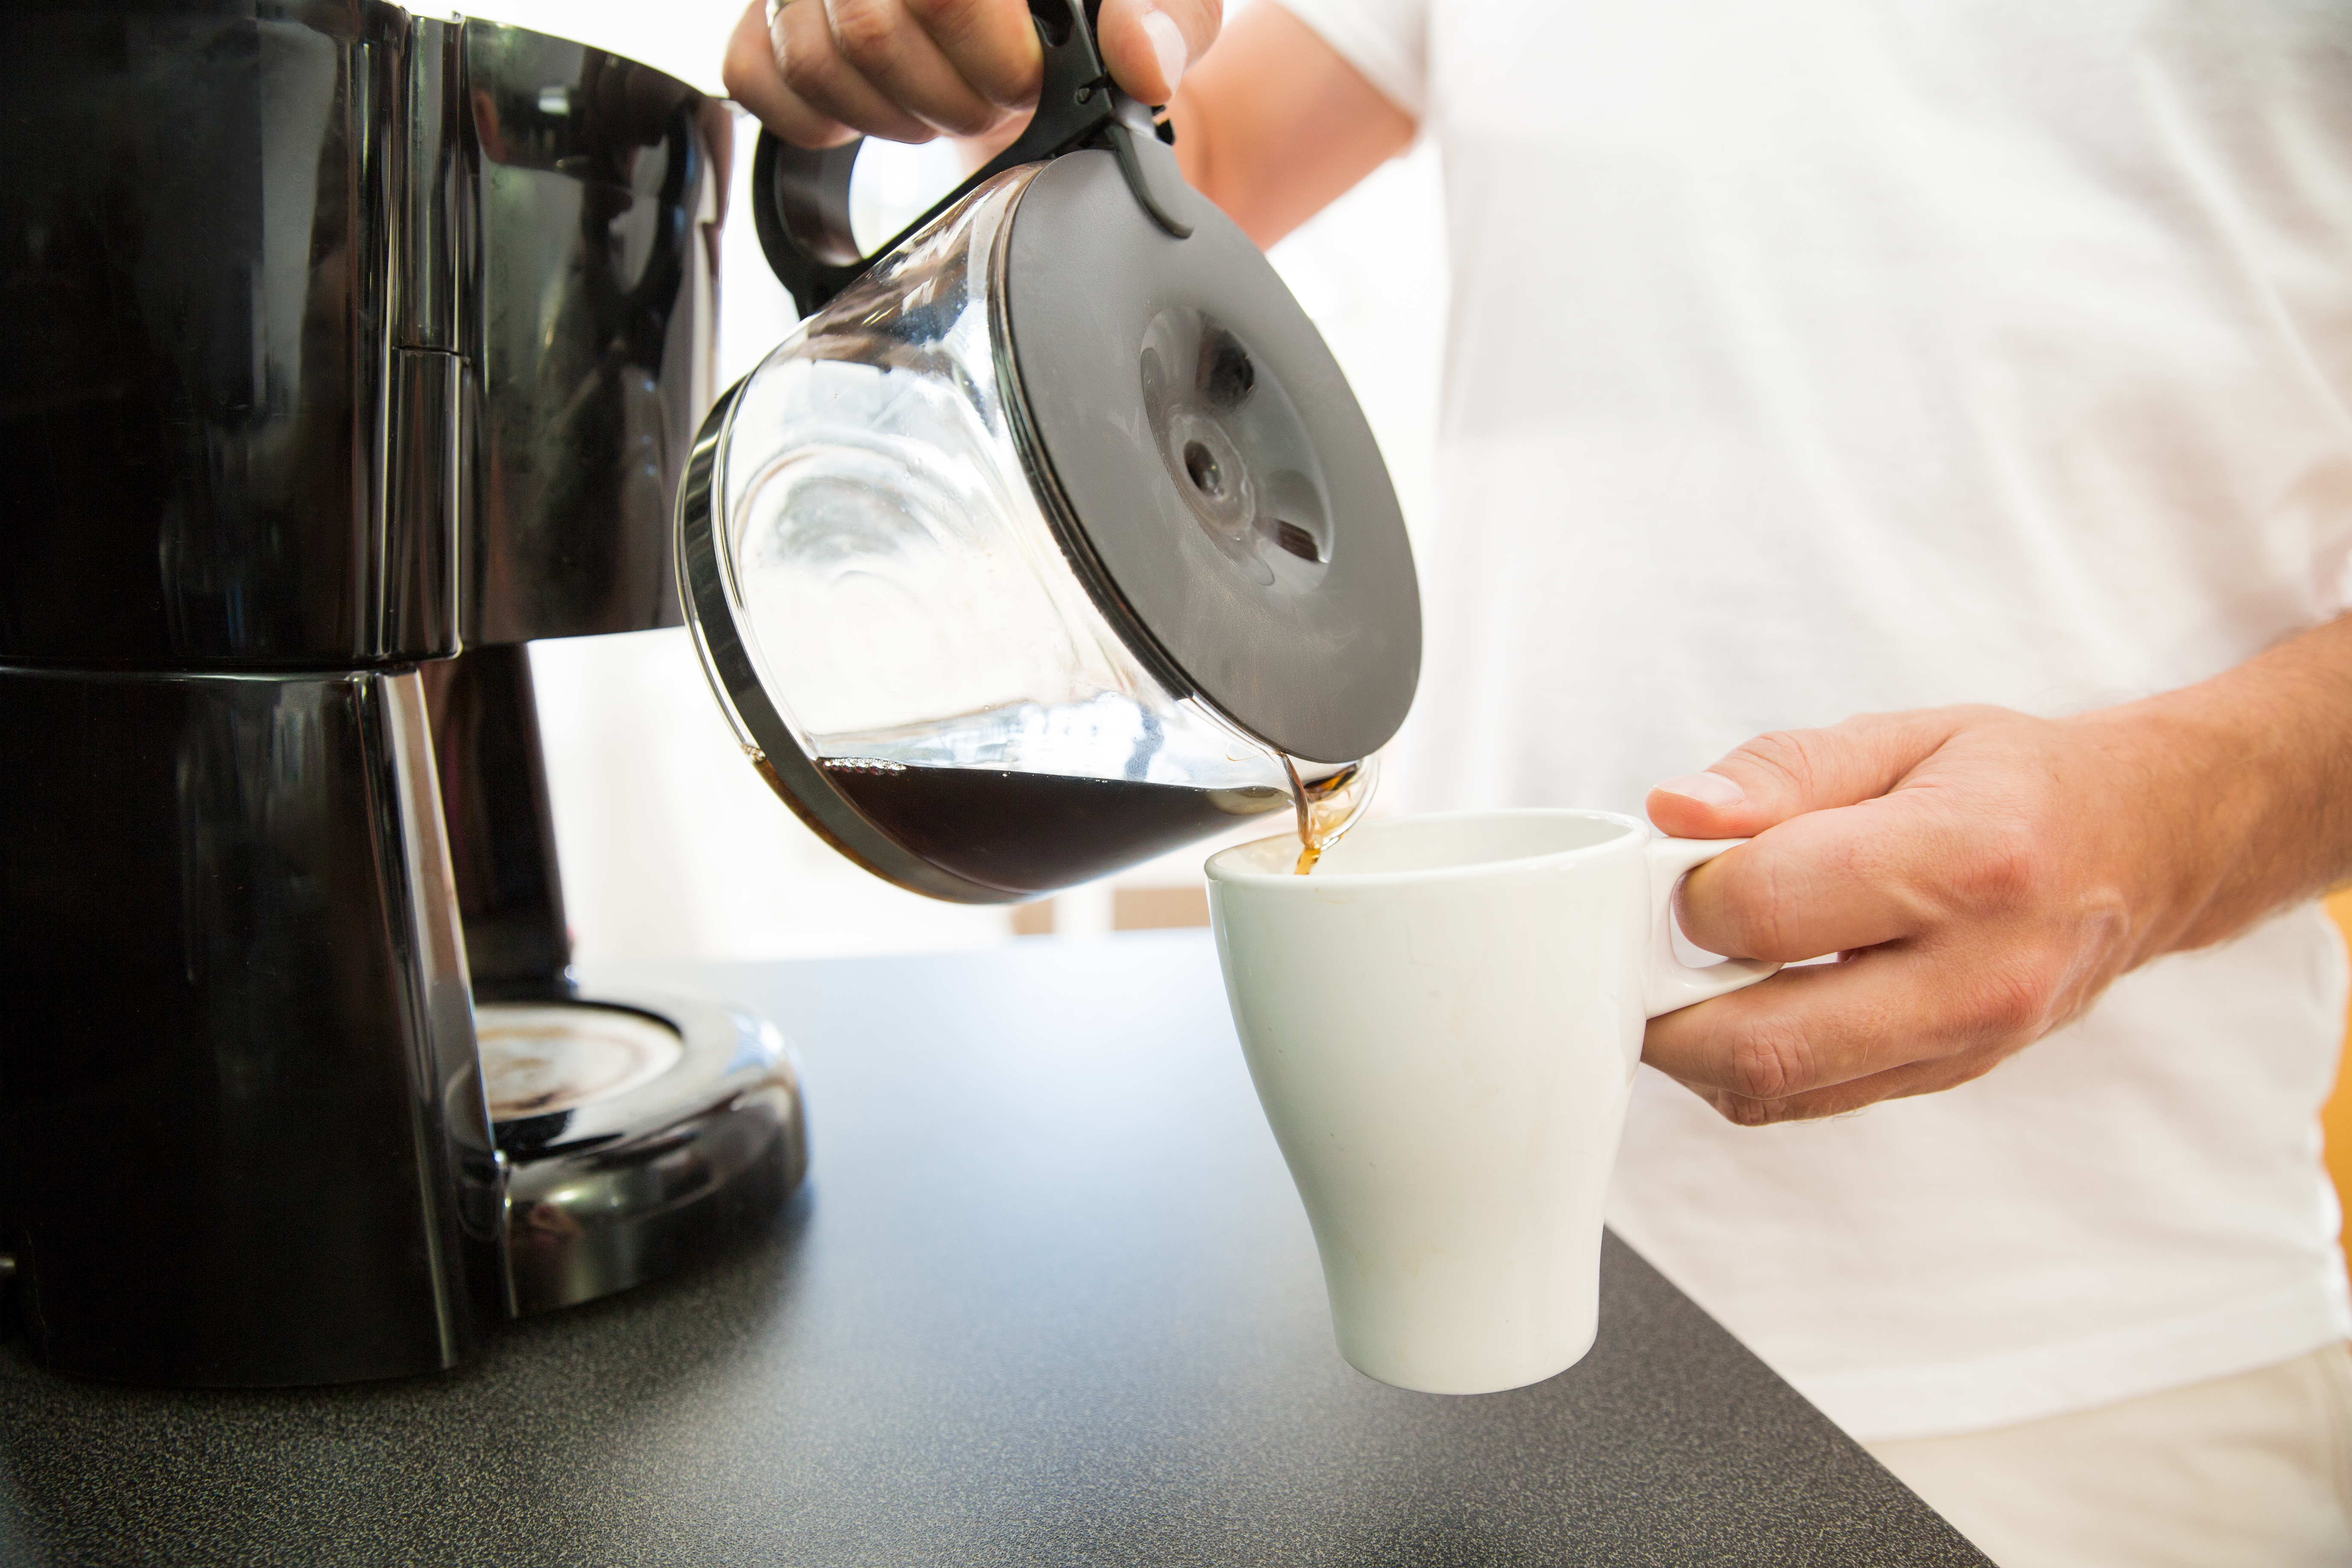 How to use the Bunn coffee maker 